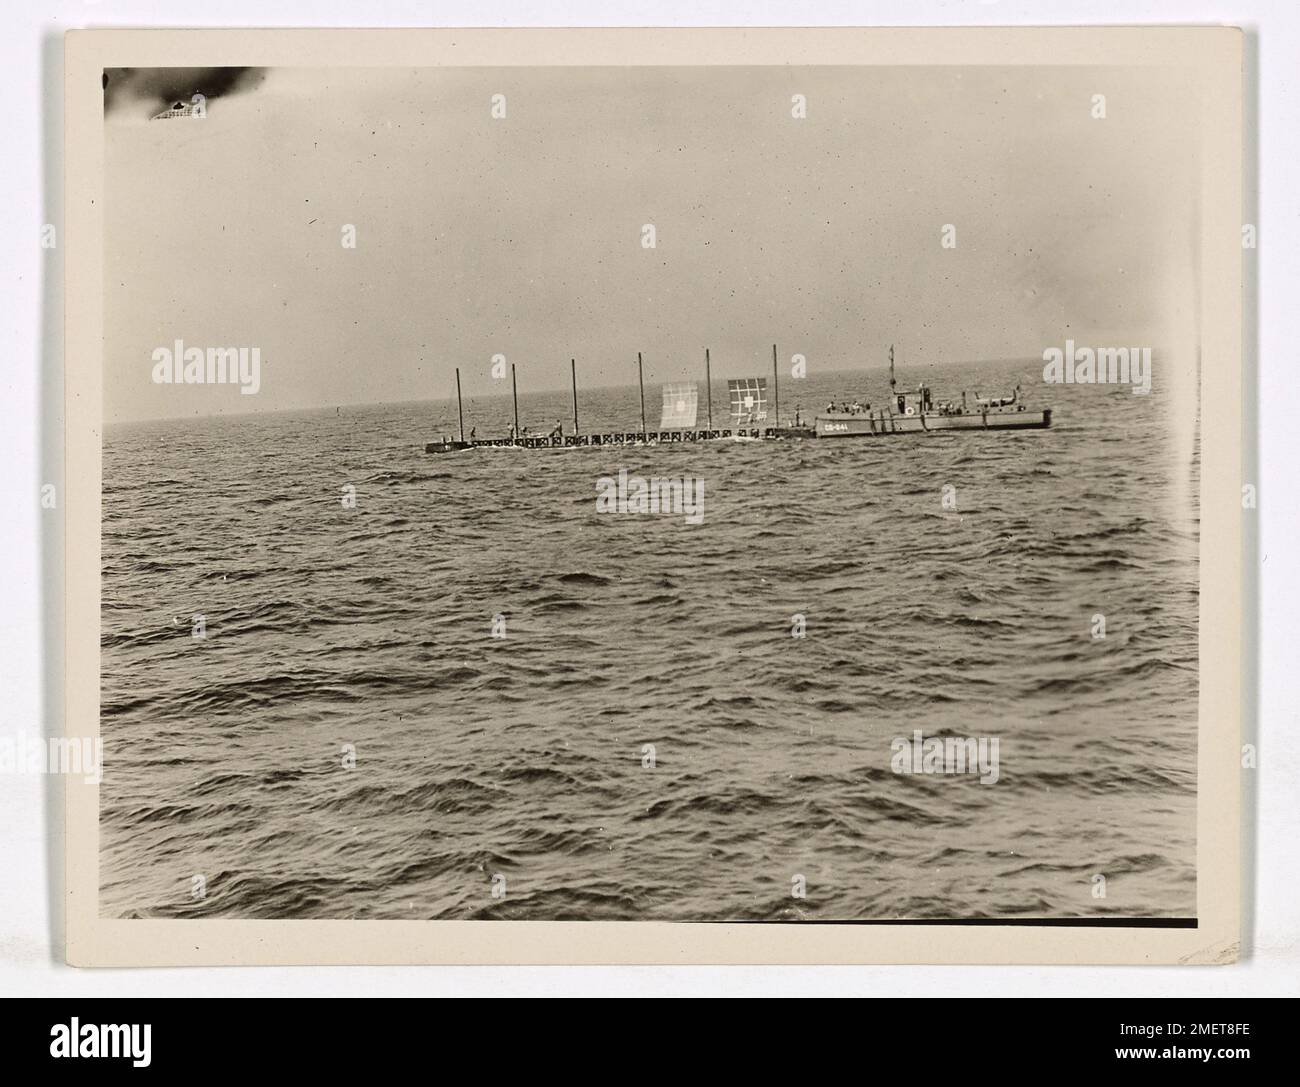 Gunnery Exercises. This image depicts a target raft off Montauk Point, New York. Short range battle practice. Stock Photo